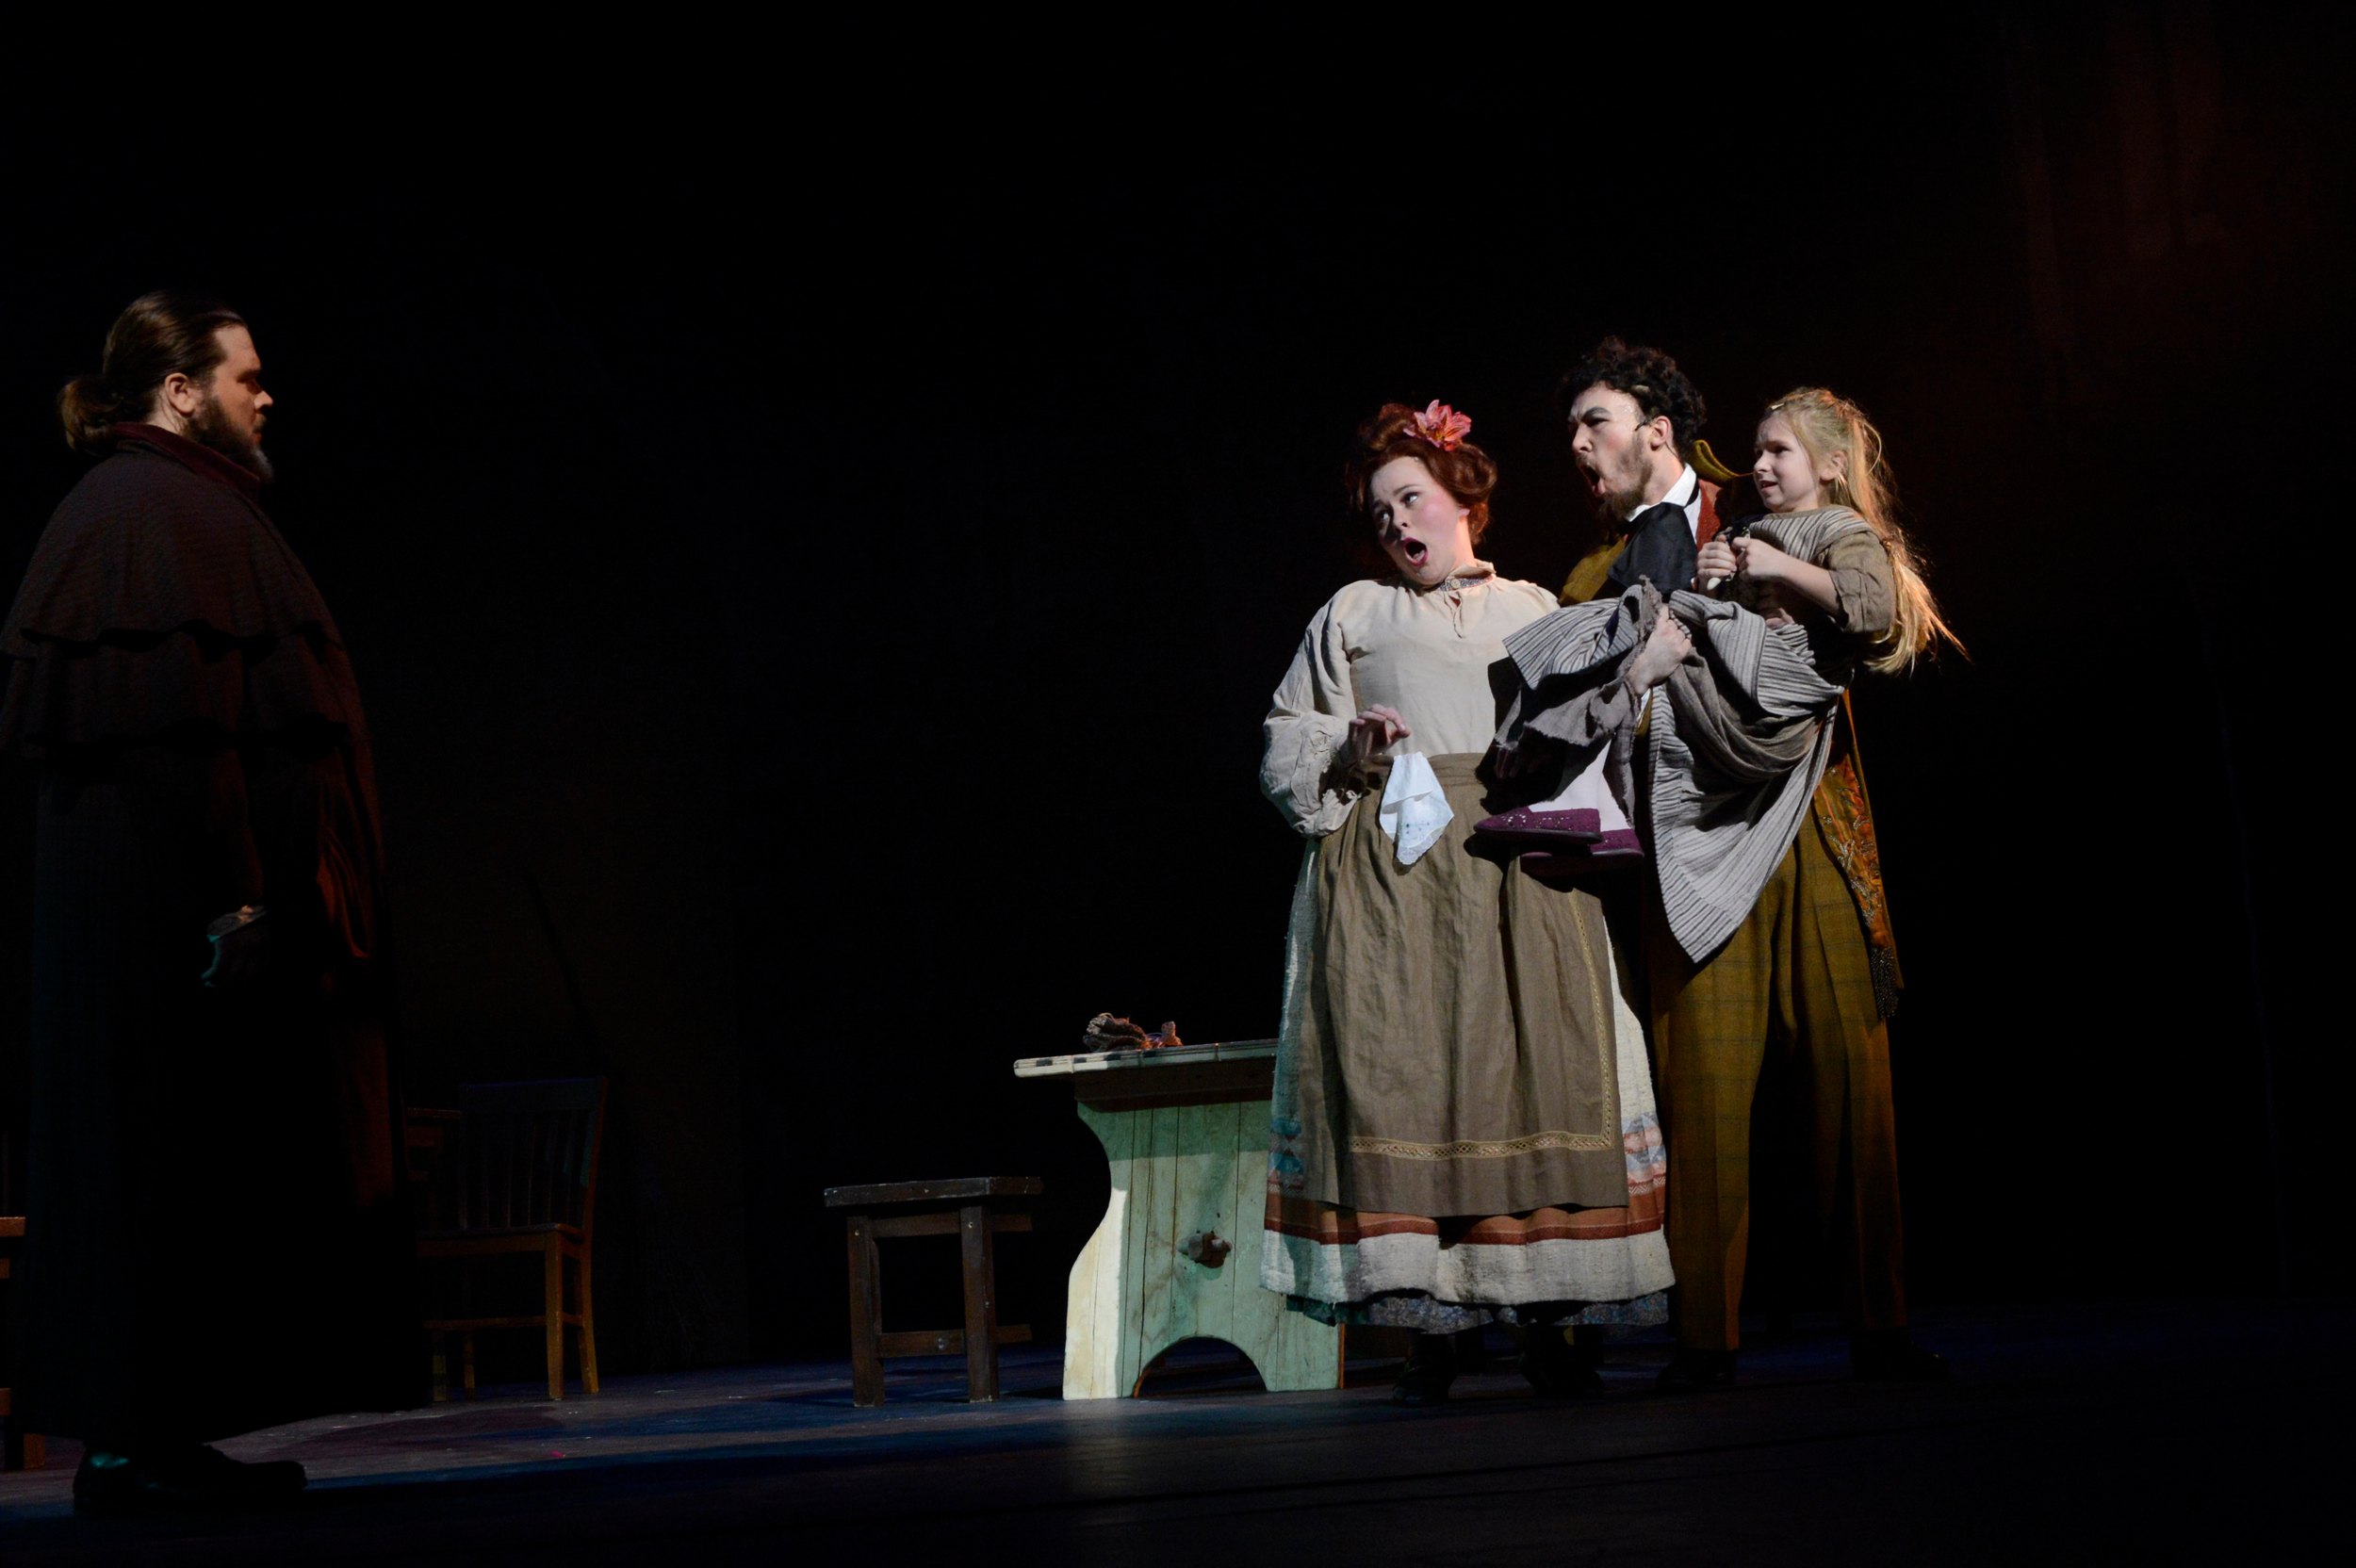  Cassi as Madame Thenardier in Wright State University's production of  Les Misérables  